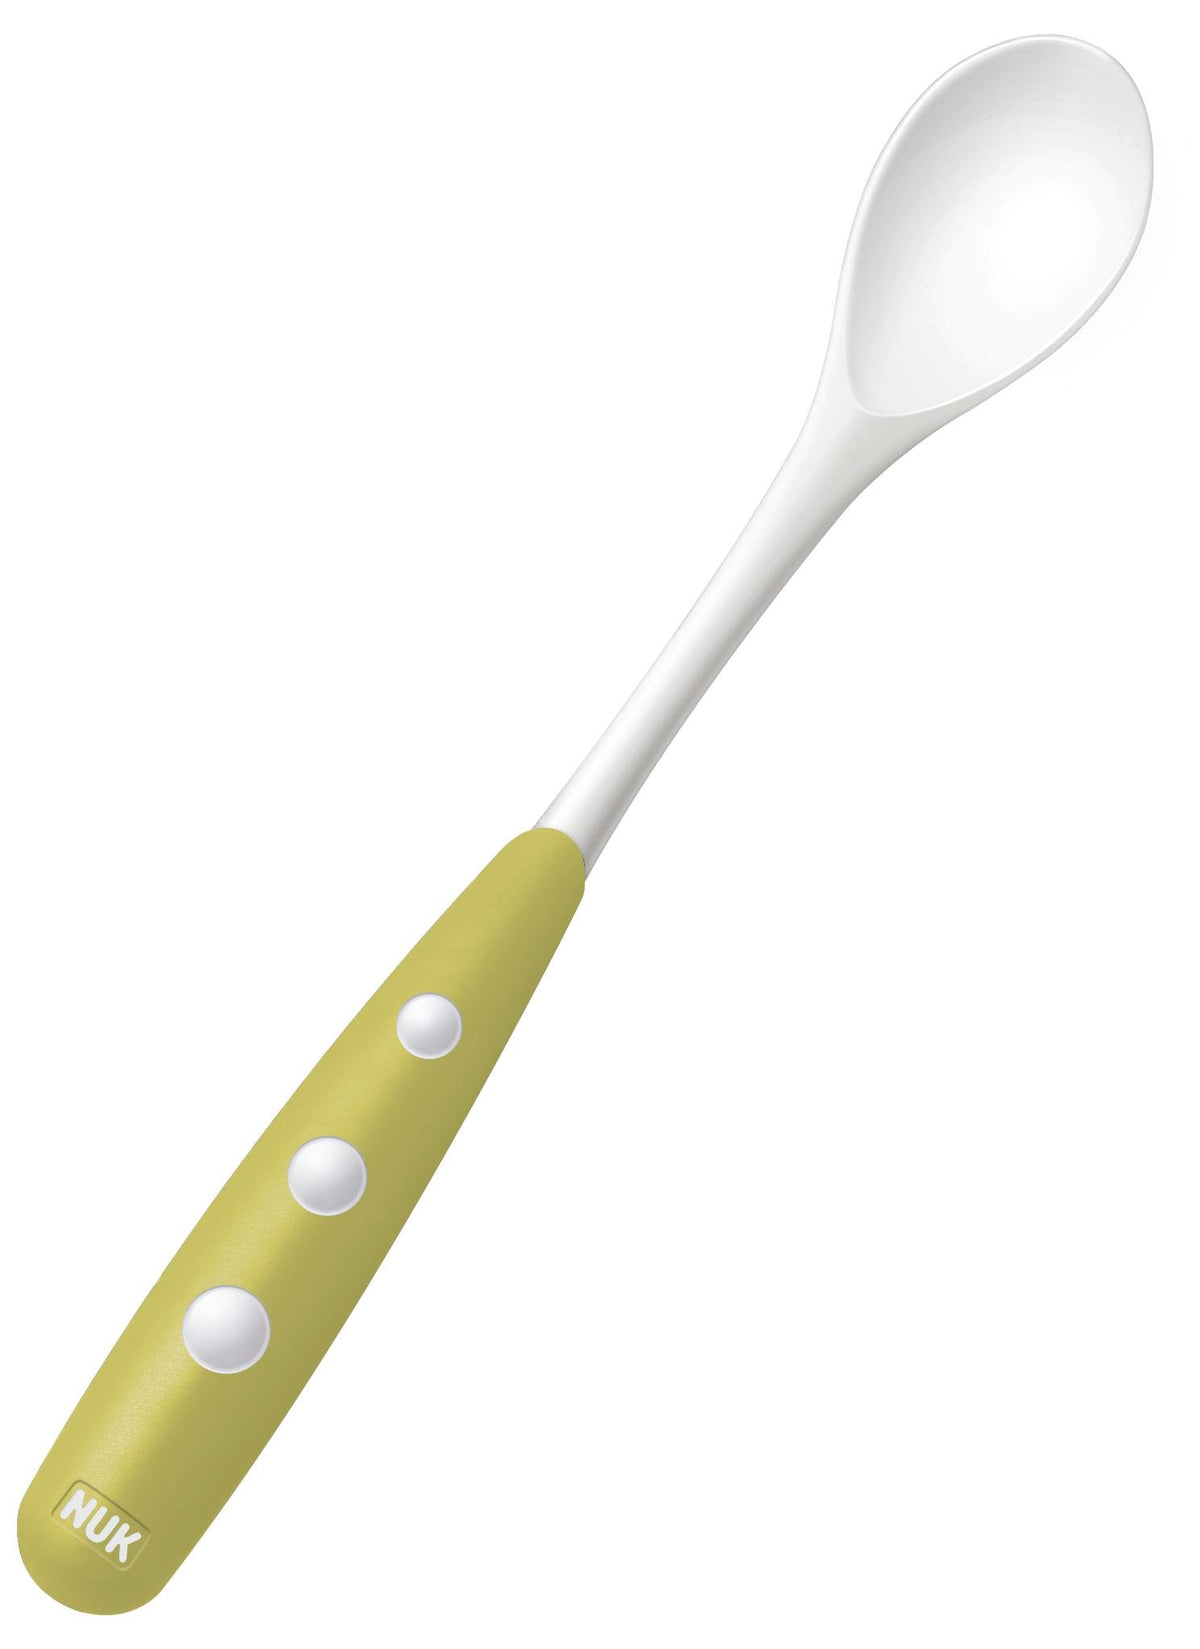 NUK Easy Learning 10255111 Baby Feeding Spoon Rounded Edges Extra-Long Non-Slip Handle BPA-Free Pack of 2 Pistachio Colour